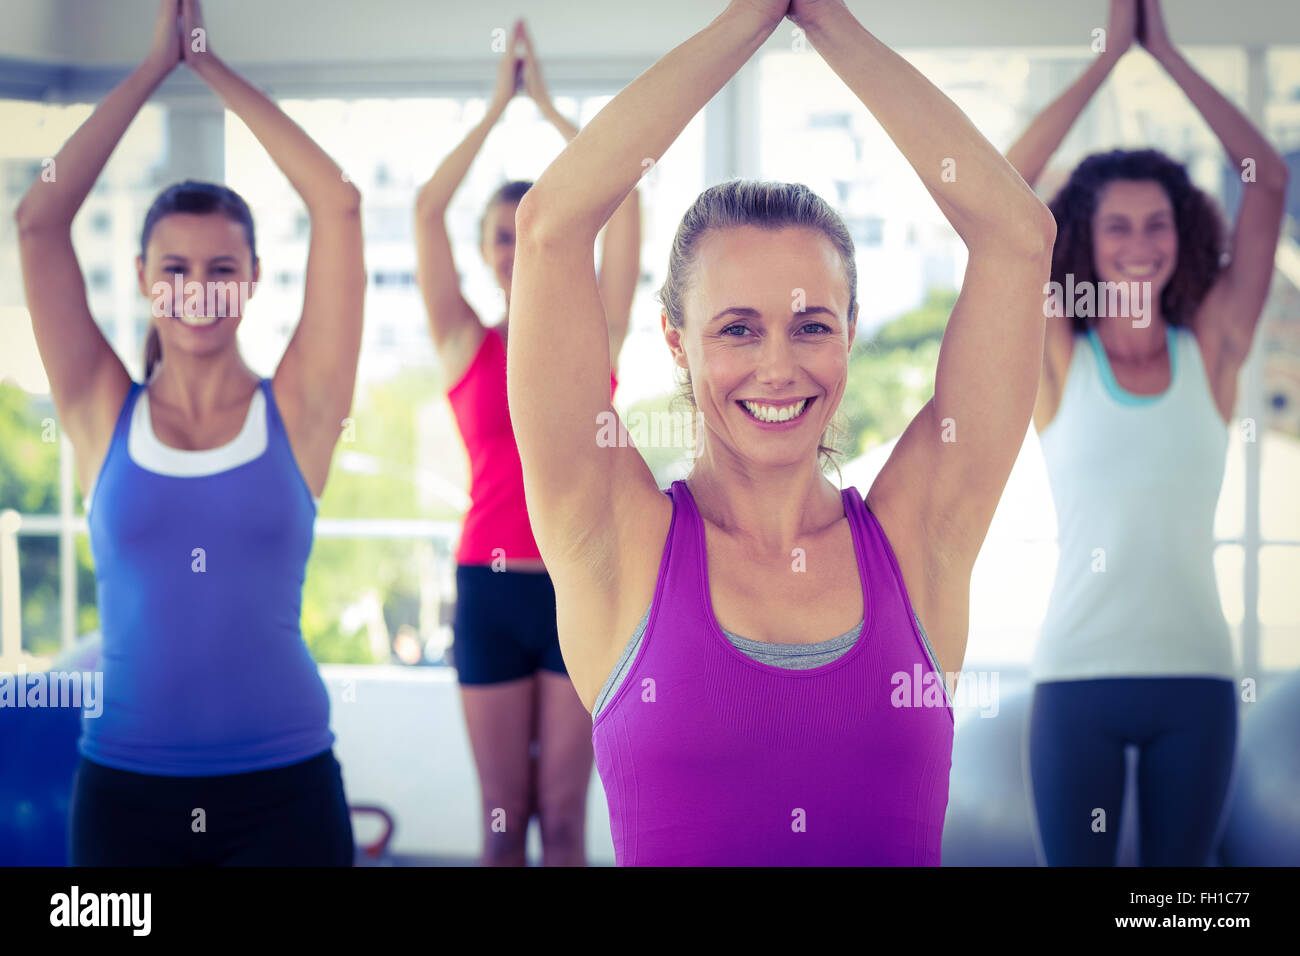 Cheerful women in fitness studio les mains jointes Banque D'Images